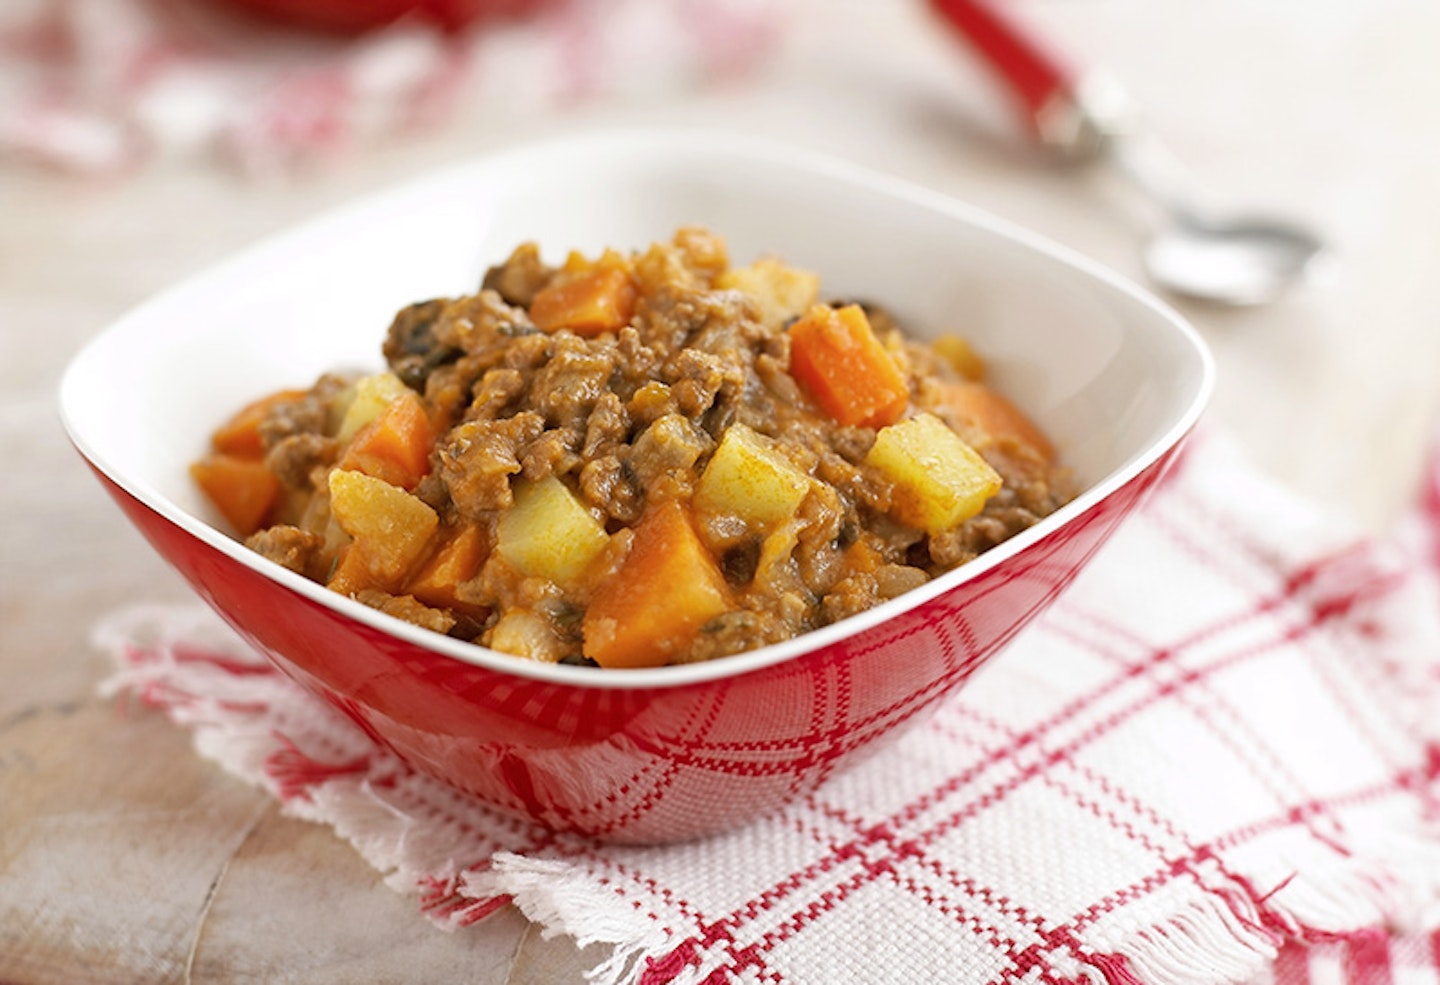 Beef with sweet potato, parsnip and mushrooms by Annabel Karmel